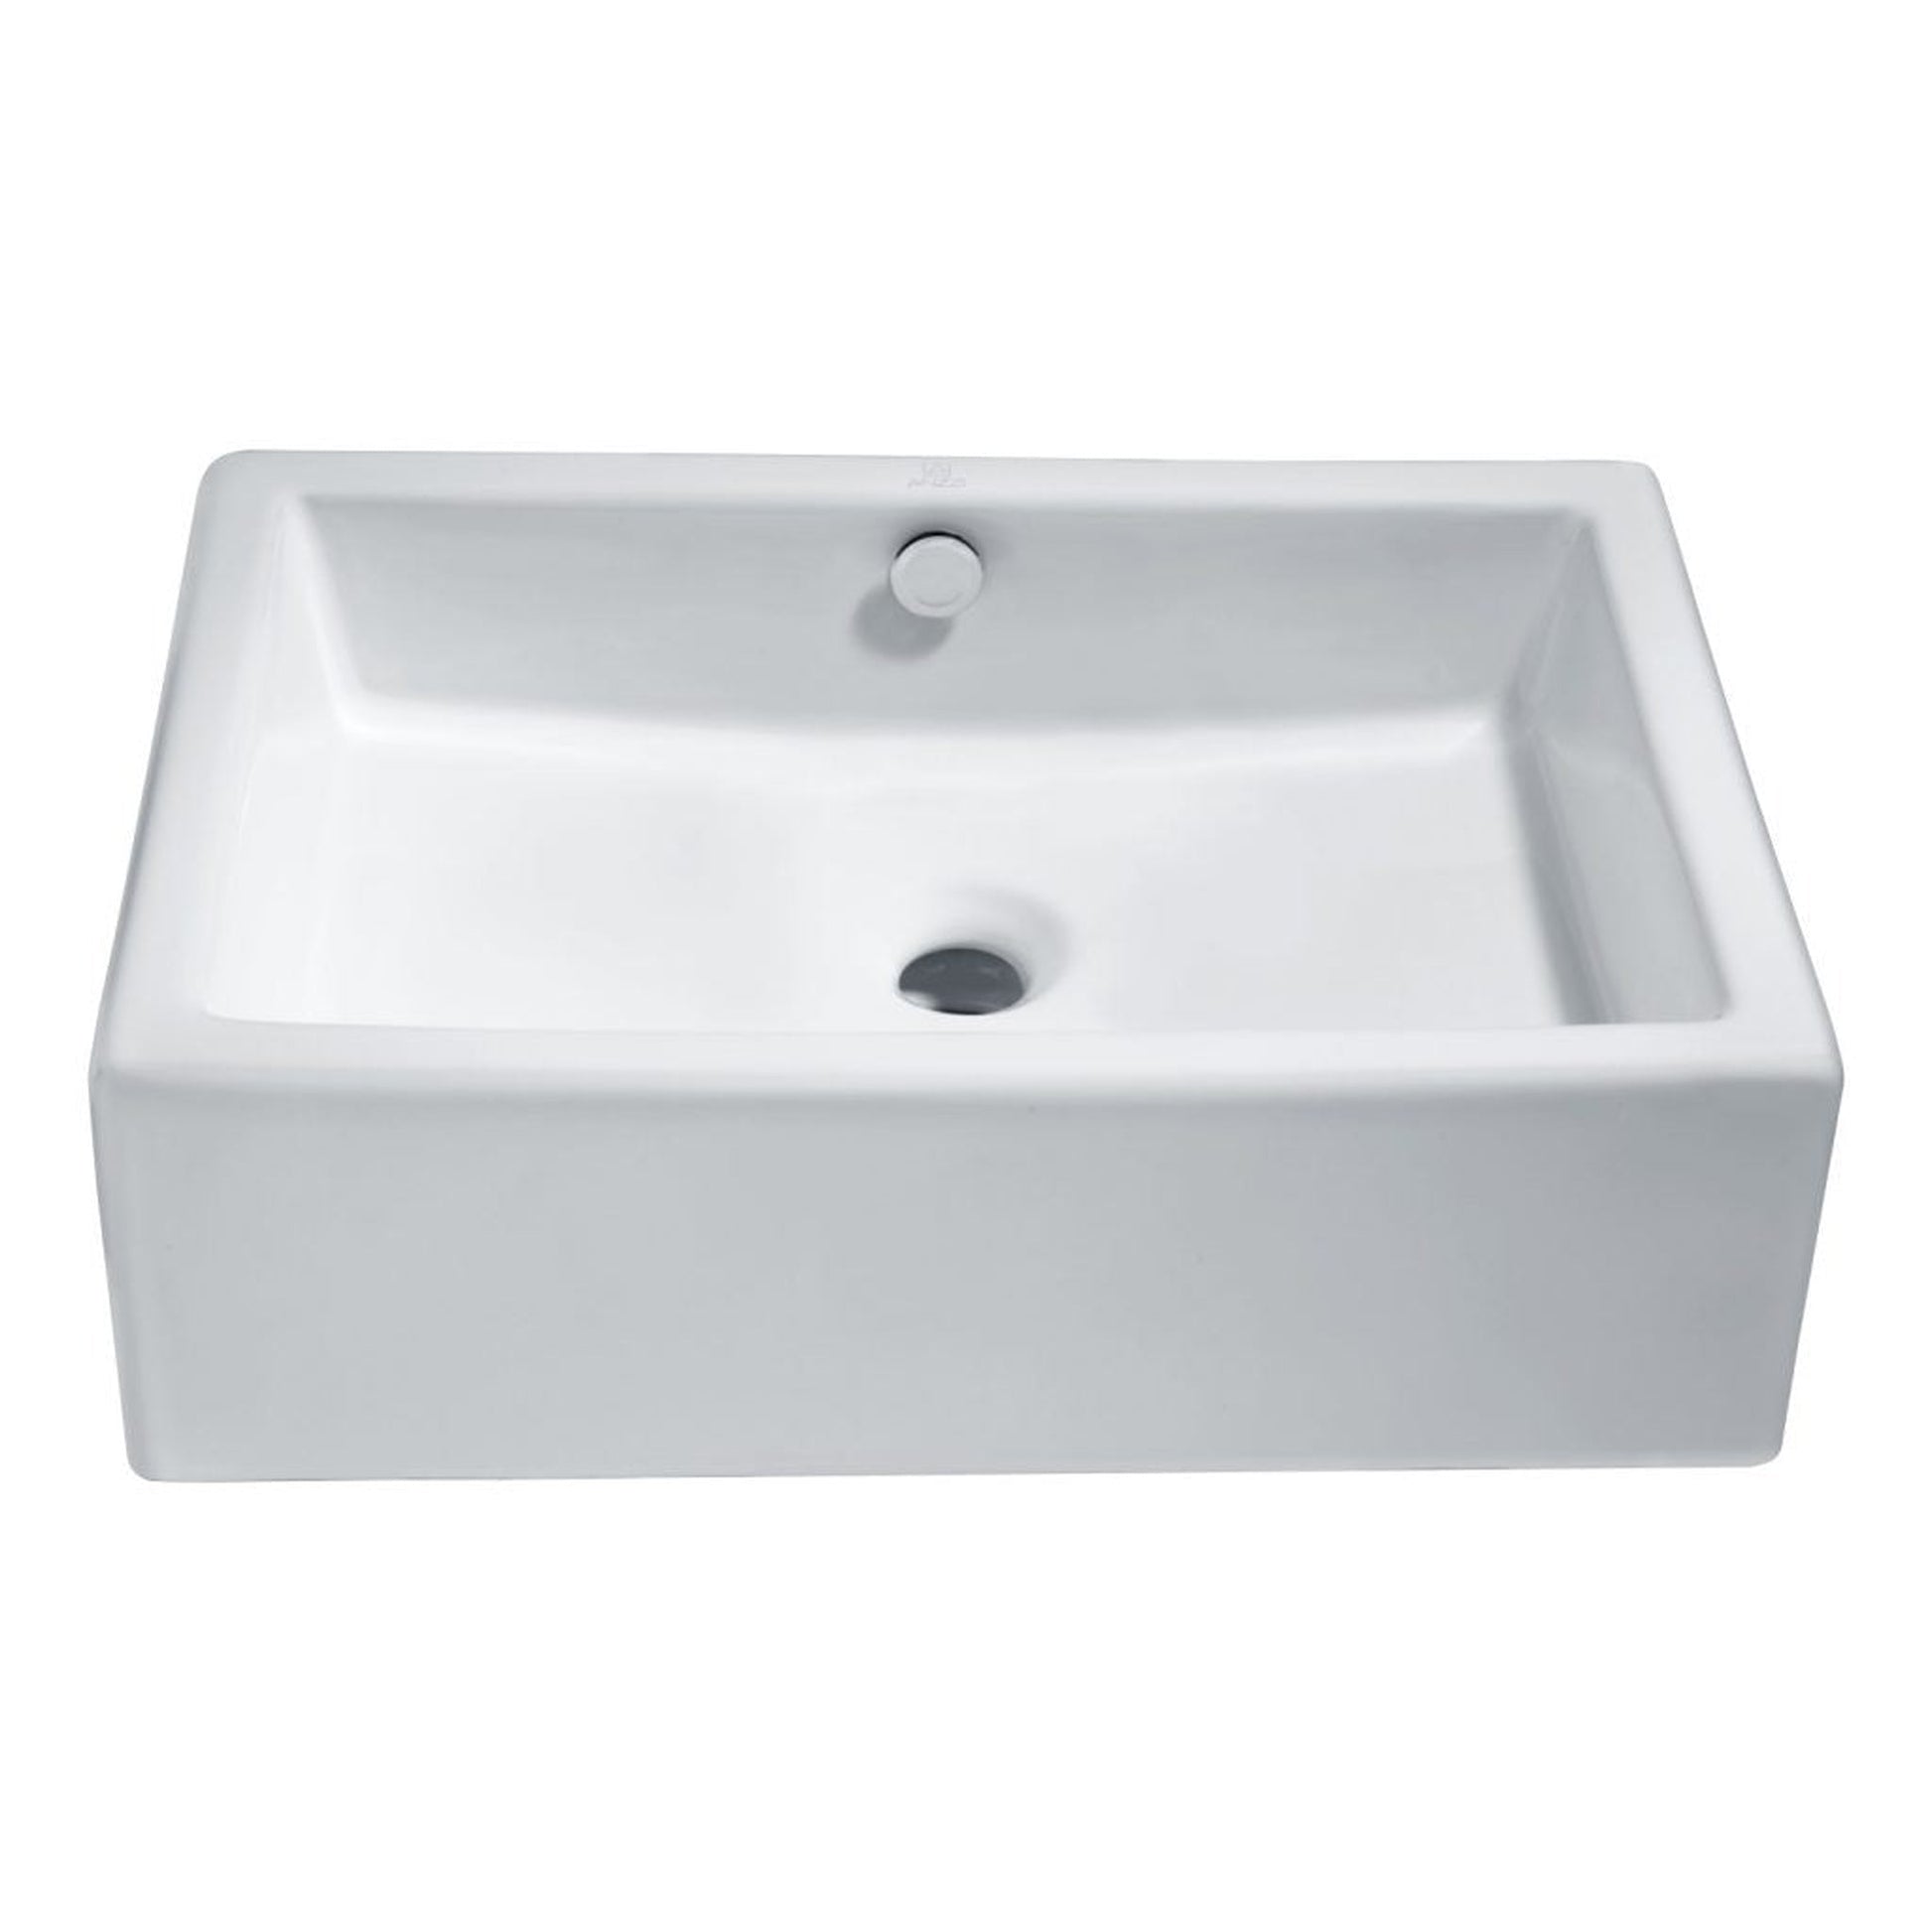 Anzzi Deux Series 20" x 14" Rectangular Glossy White Vessel Sink With Built-In Overflow